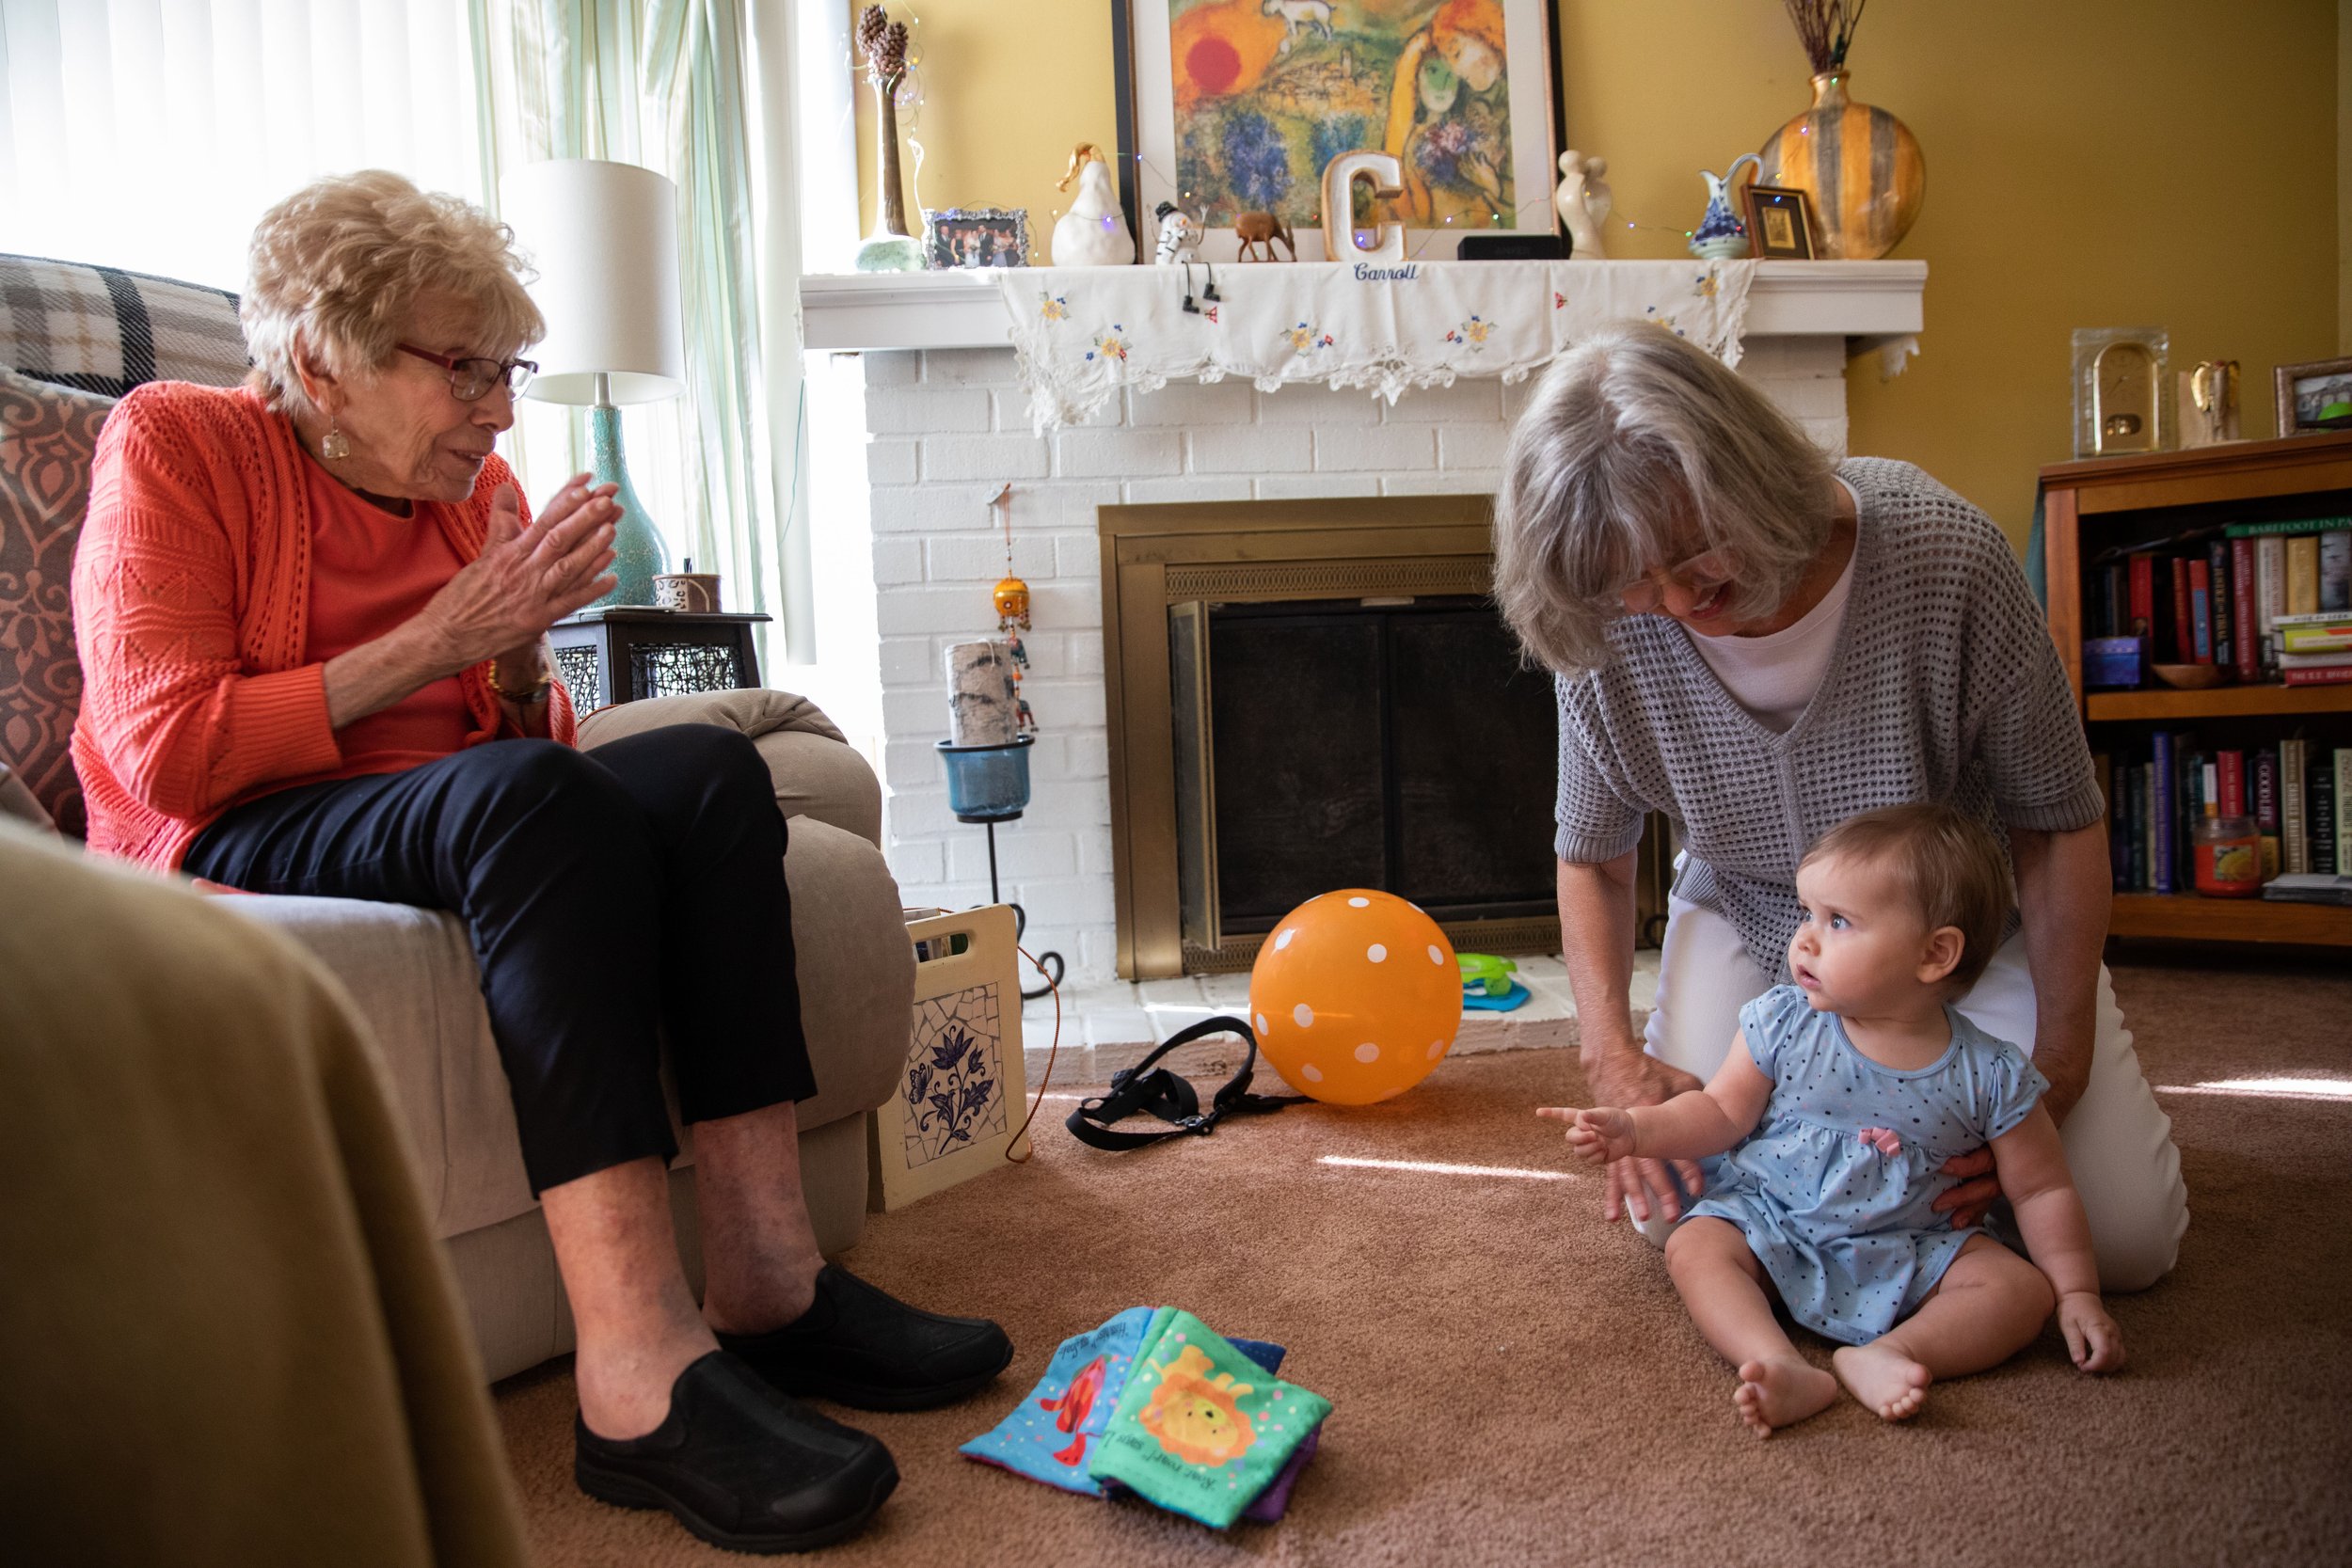   Alma Freeman (bottom right), six months old, interacts with her great-grandmother Caroline Ranucci (right) and great-aunt Janet Ranucci at a family get-together in Marlton, N.J. on Sept. 5, 2021.  